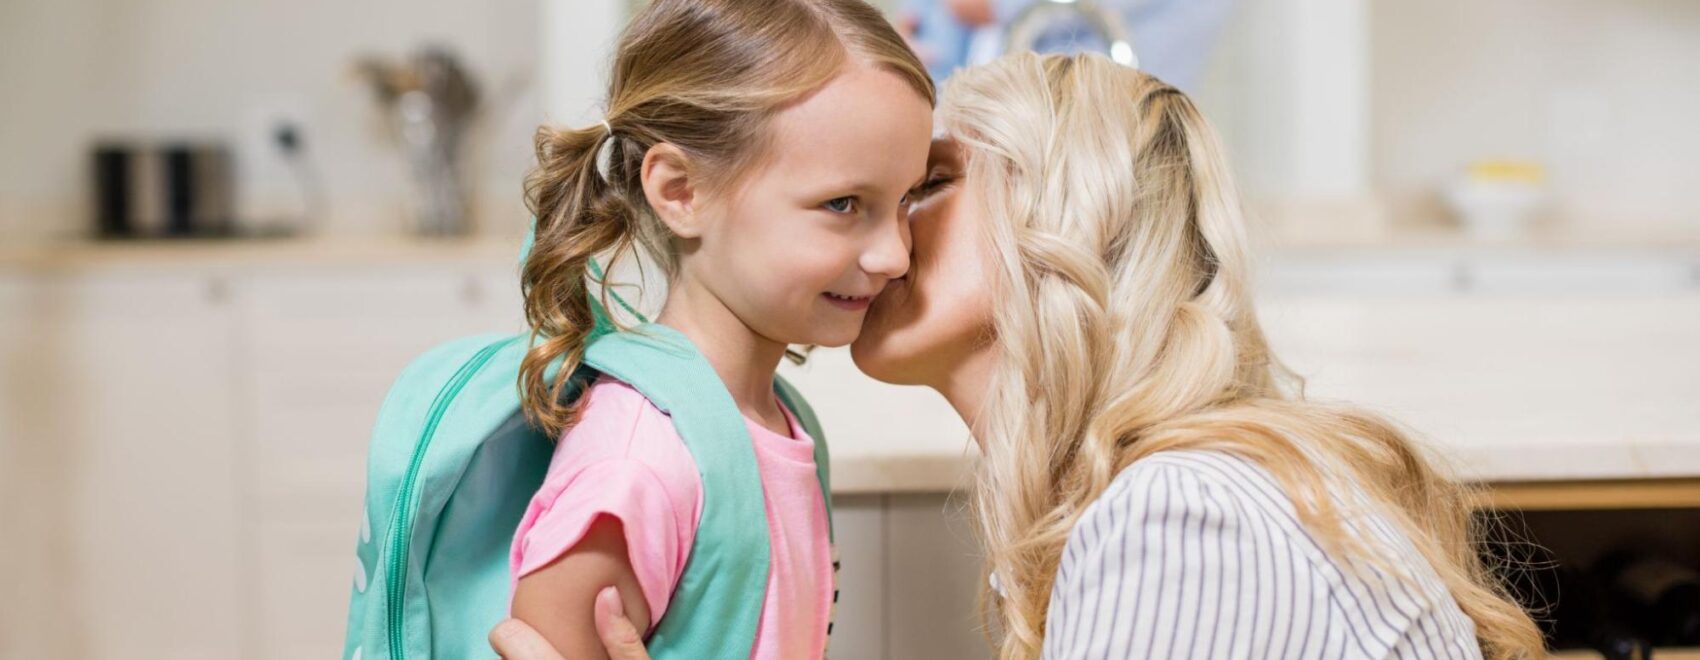 A mother kisses her daughter on the cheek. Learn how chiropractic care in Orland Park, IL can offer support by searching for "chiropractor orland park" today. Chiropractic care for sciatica in orland park, IL can help your child and the new school year.